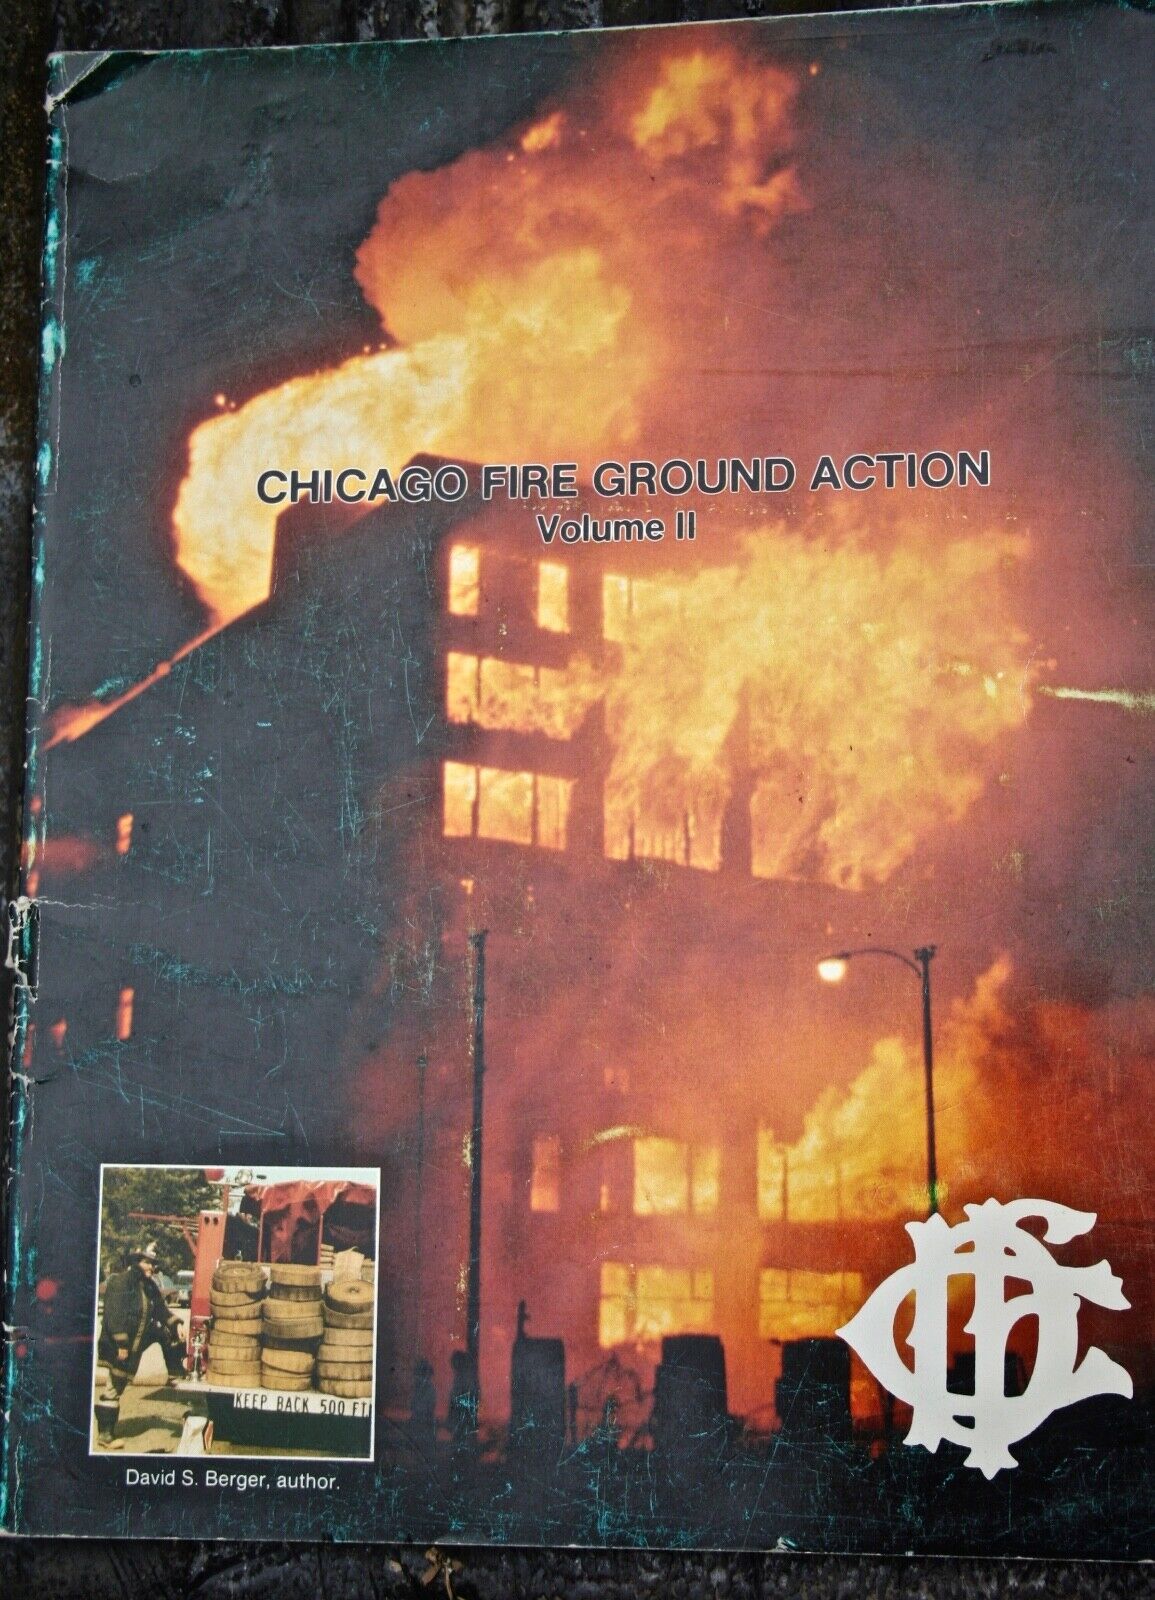 fire fighting book chicago fire department , Chicago fireground action vol 2